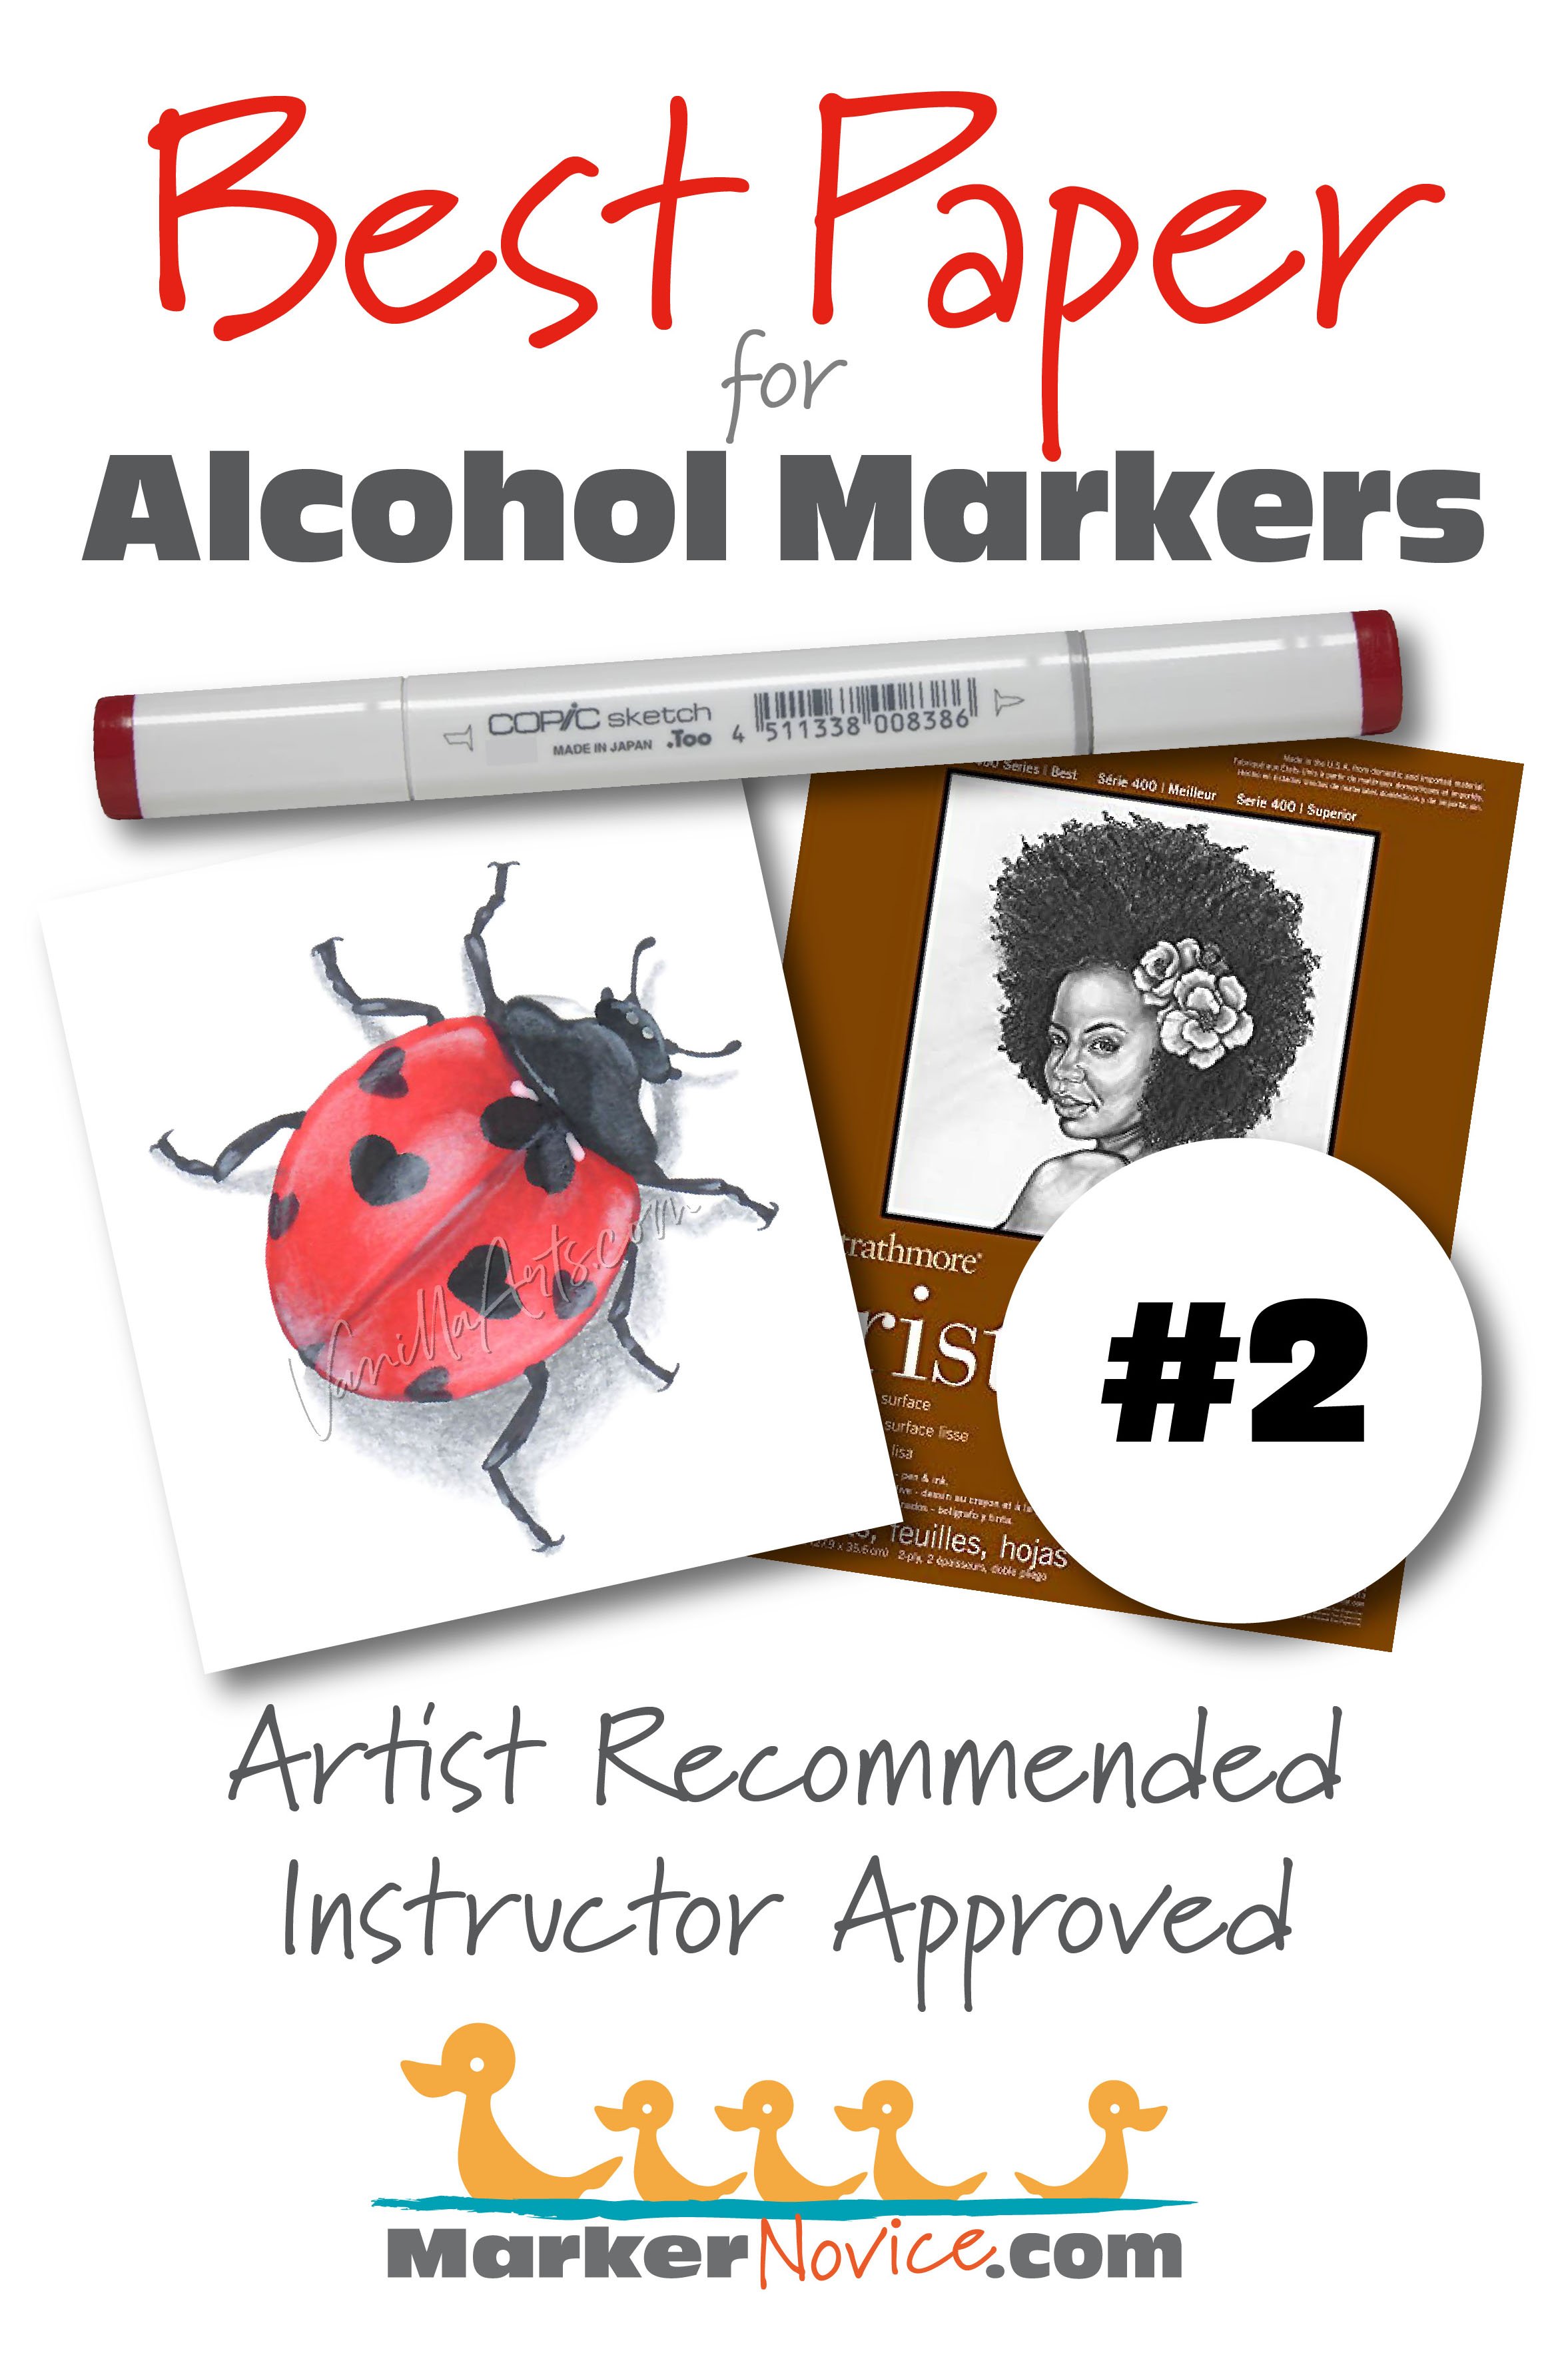 Best paper for Alcohol Markers